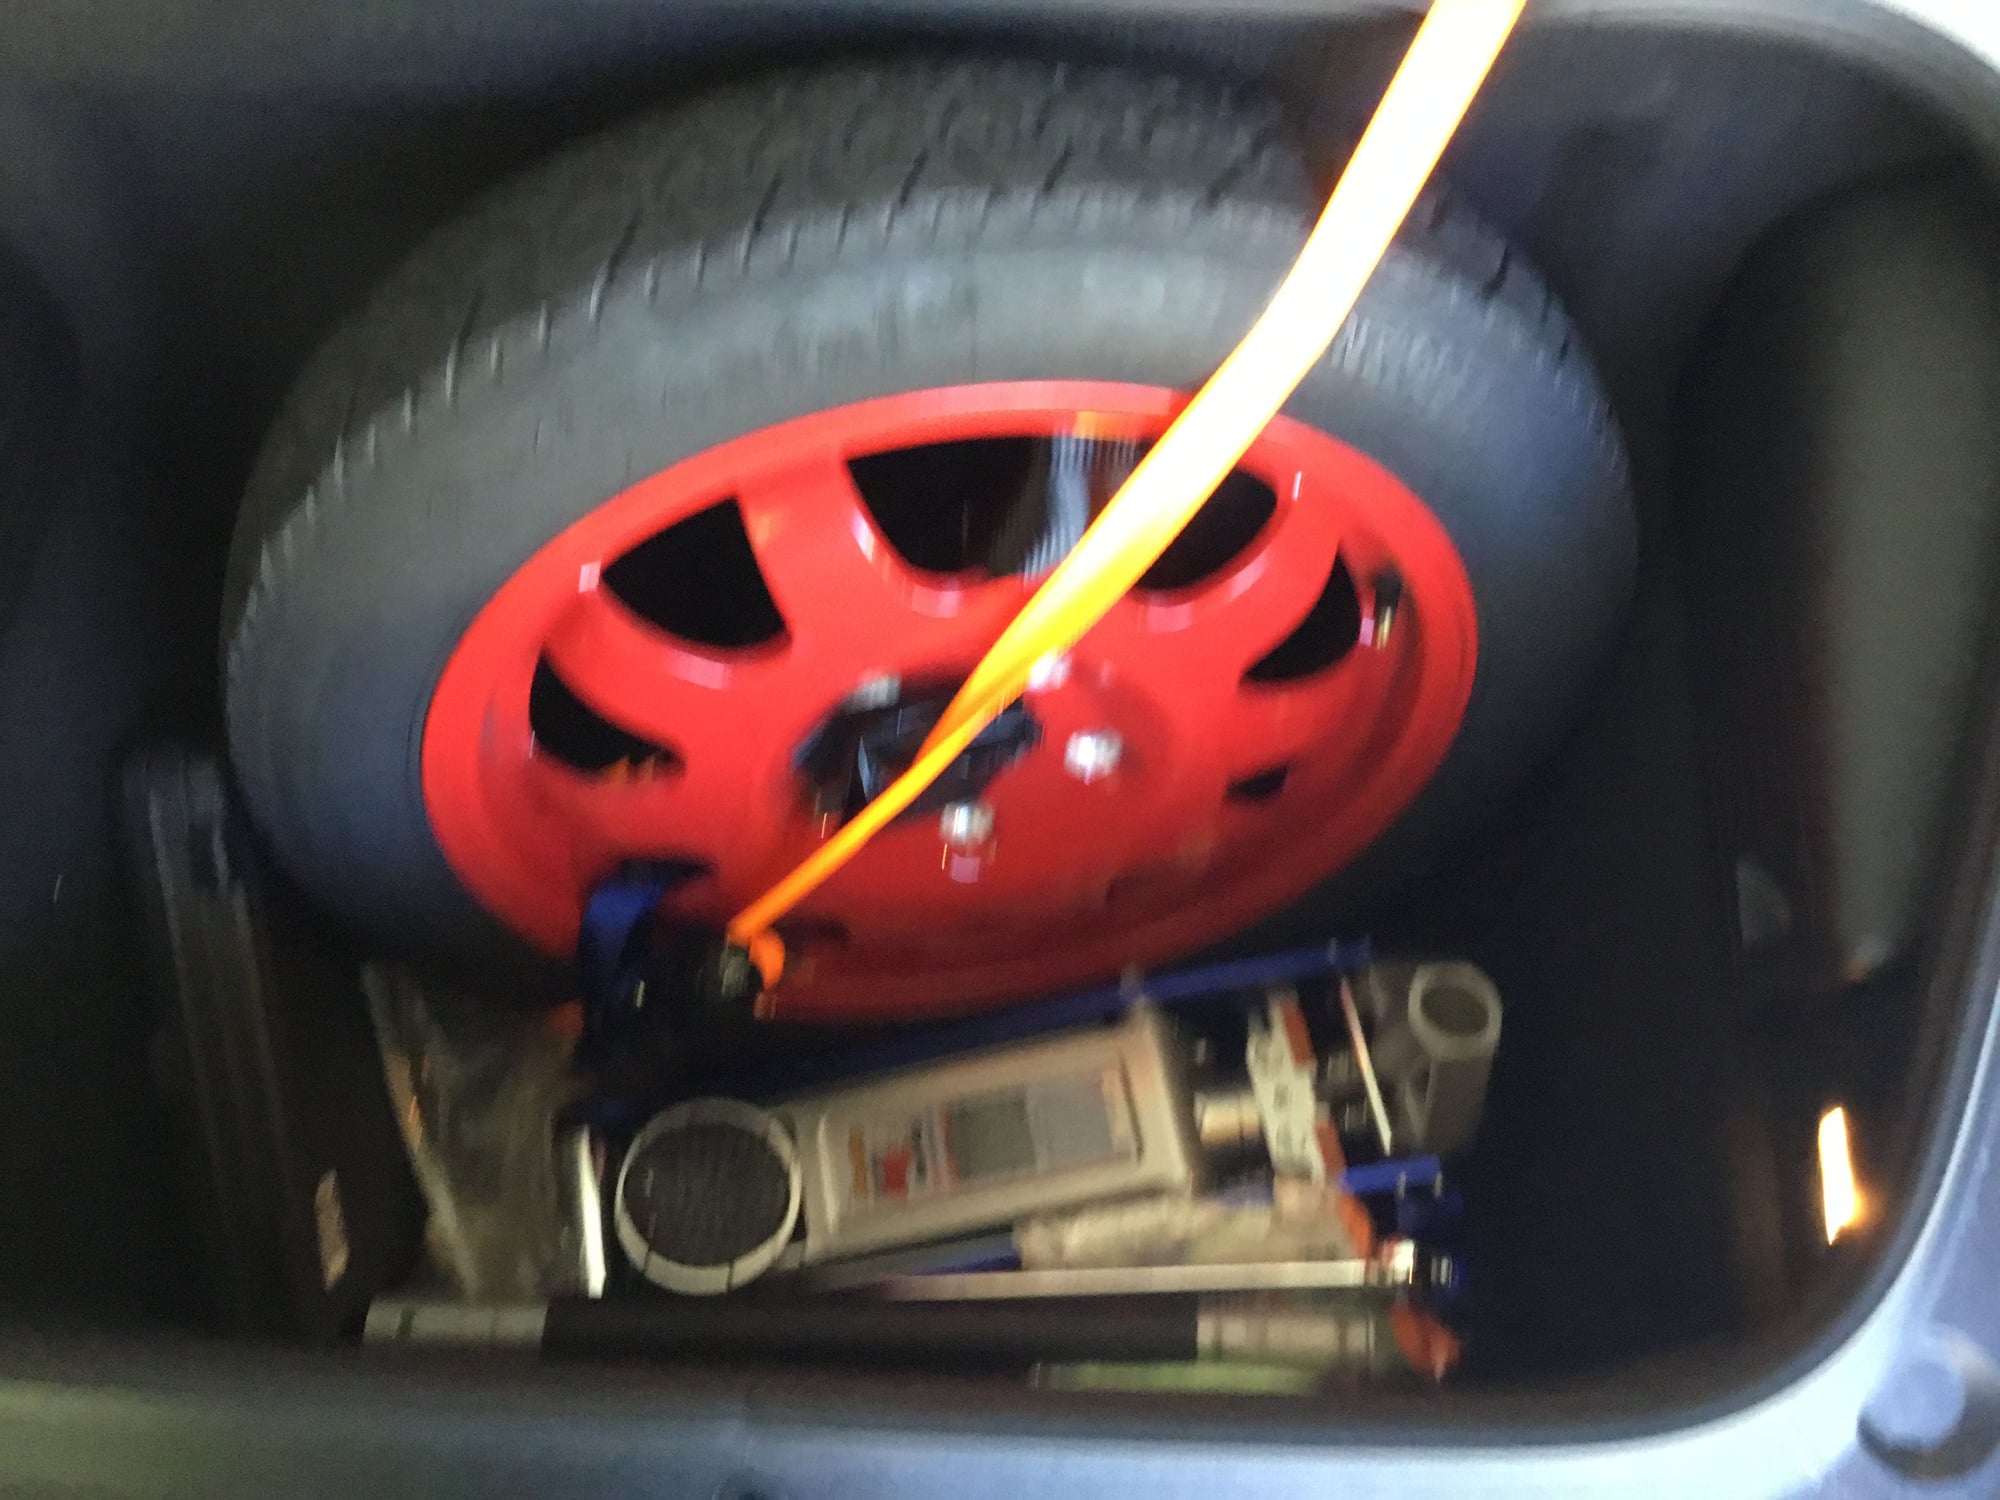 Mounting A Spare In A 987.1 Frunk - How To - Rennlist - Porsche Discussion  Forums